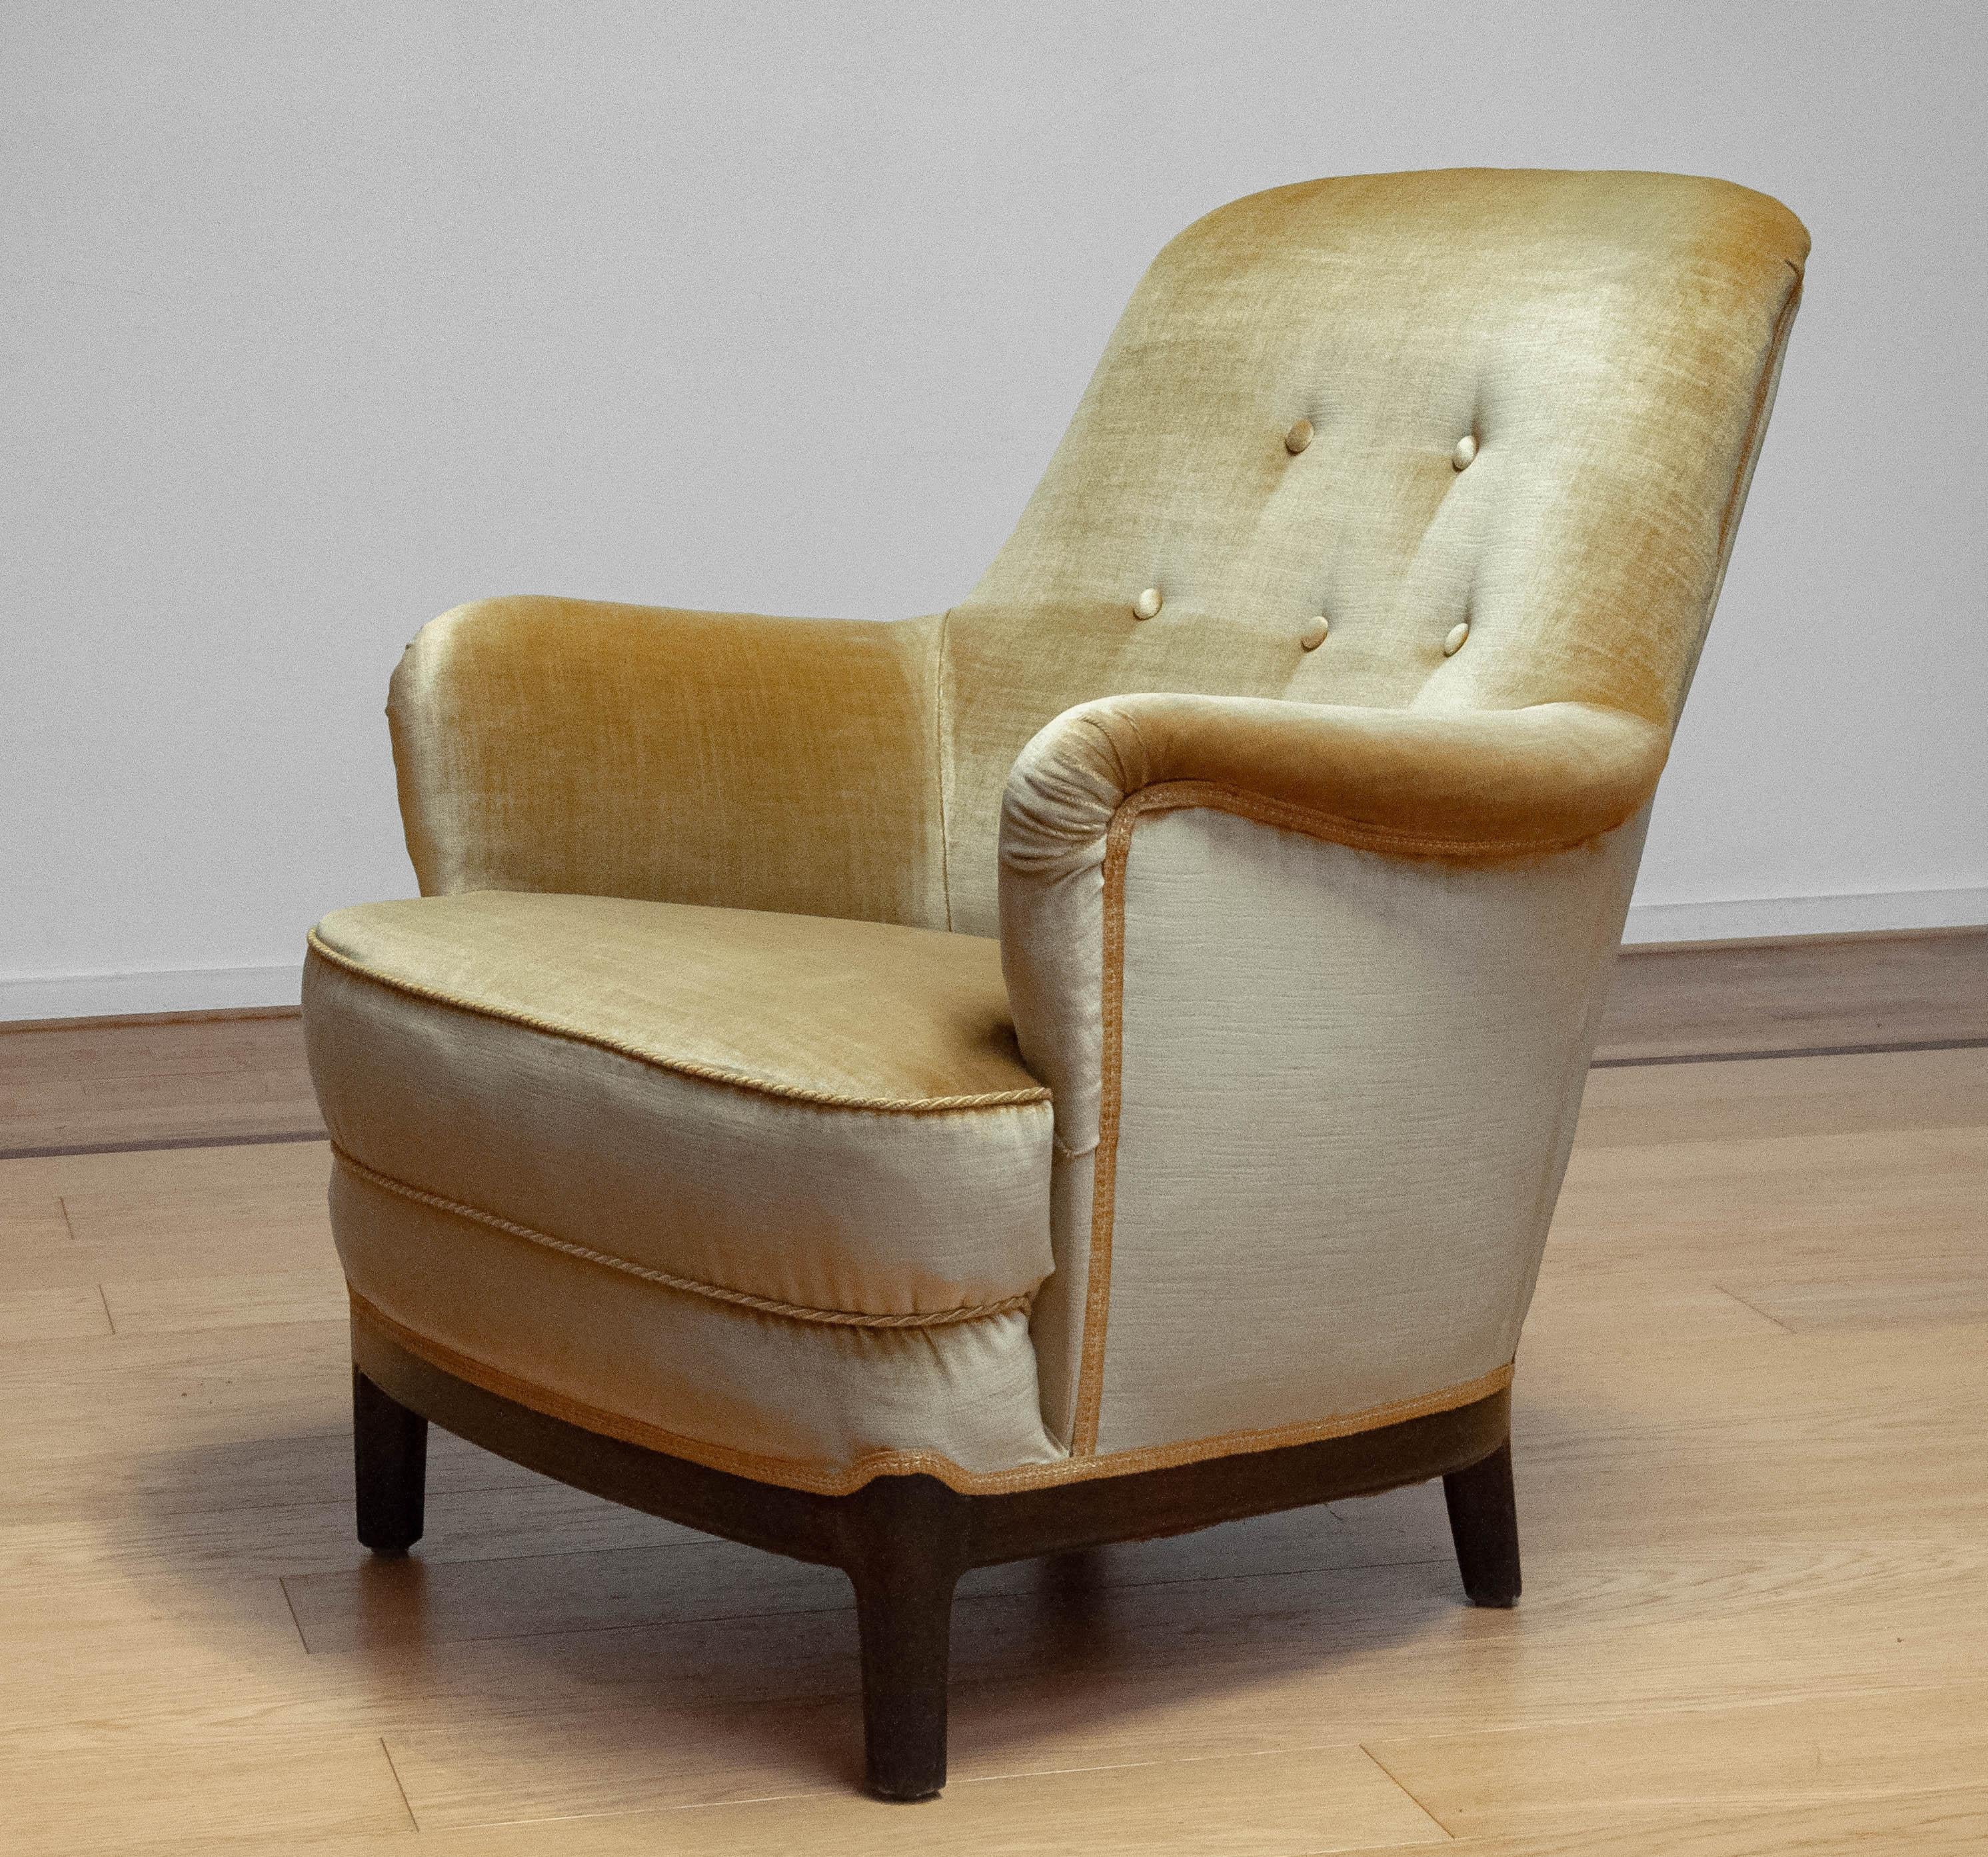 Mid-20th Century 1940s Gold Colored Velvet Upholstered Lounge Chair By Carl Malmsten Sweden For Sale